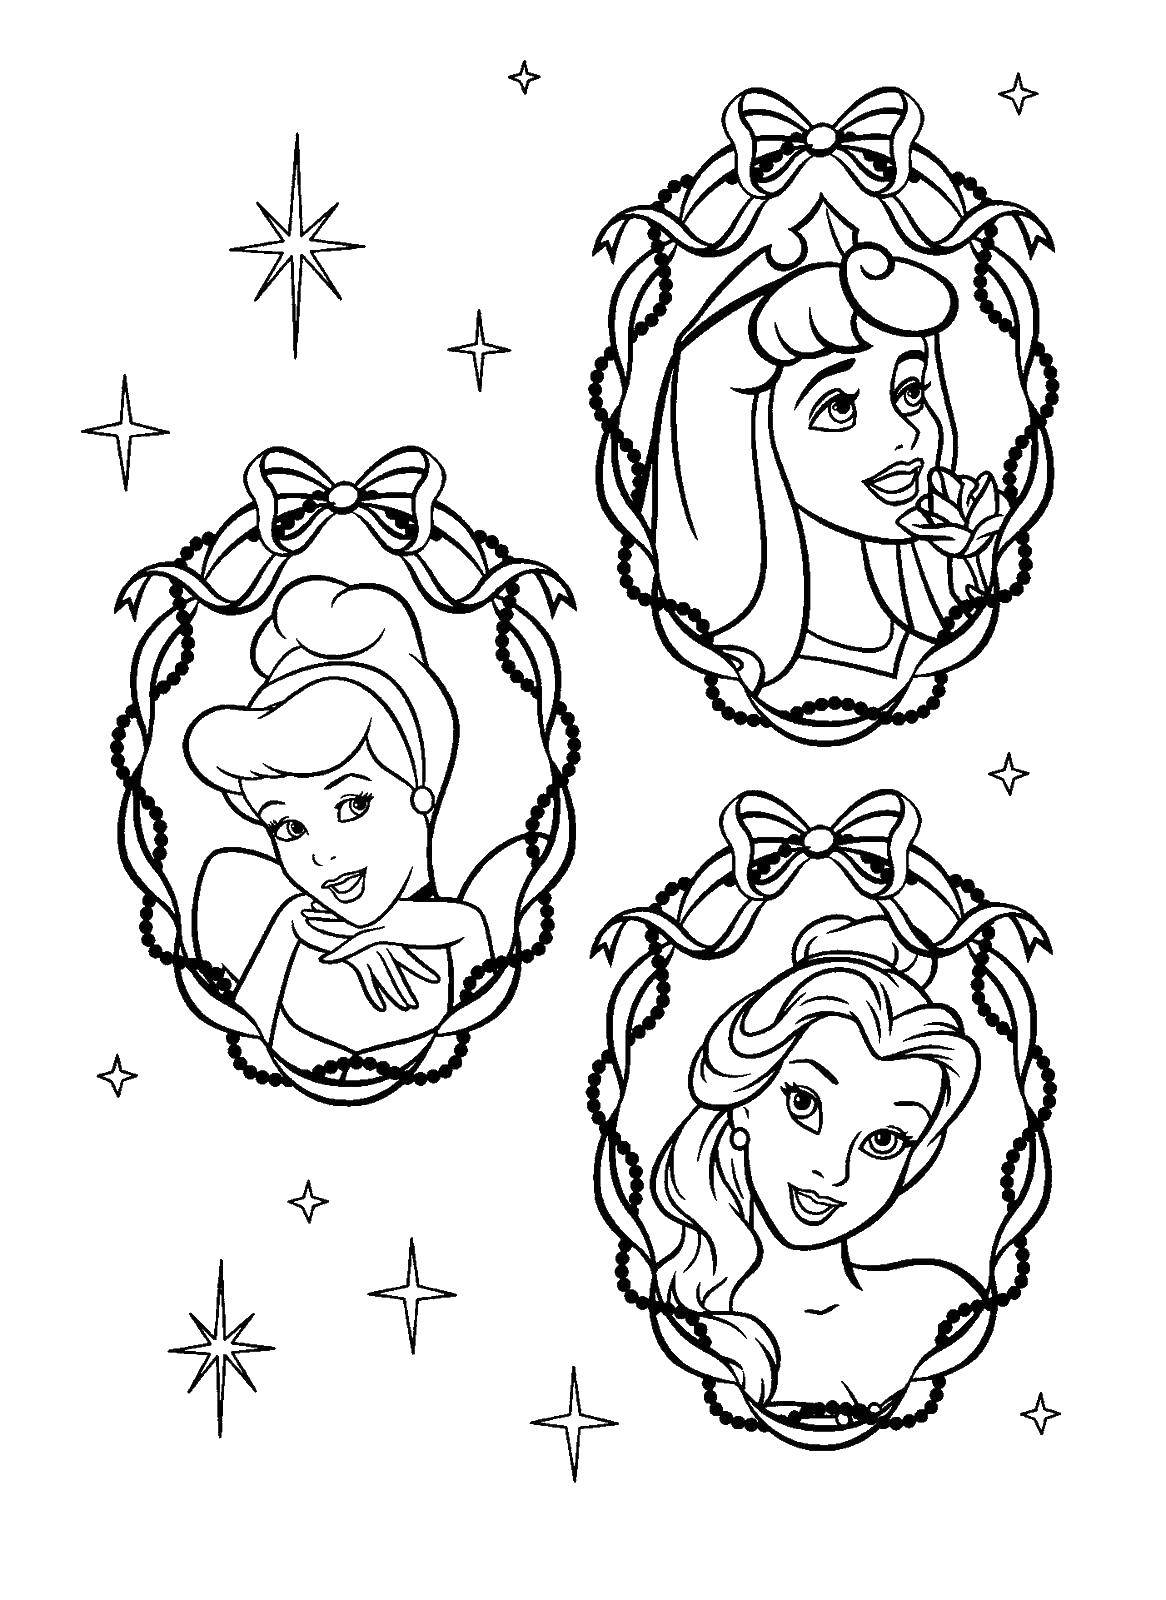 Coloring Sleeping beauty, Belle and Cinderella.. Category Disney coloring pages. Tags:  Disney, Princess.